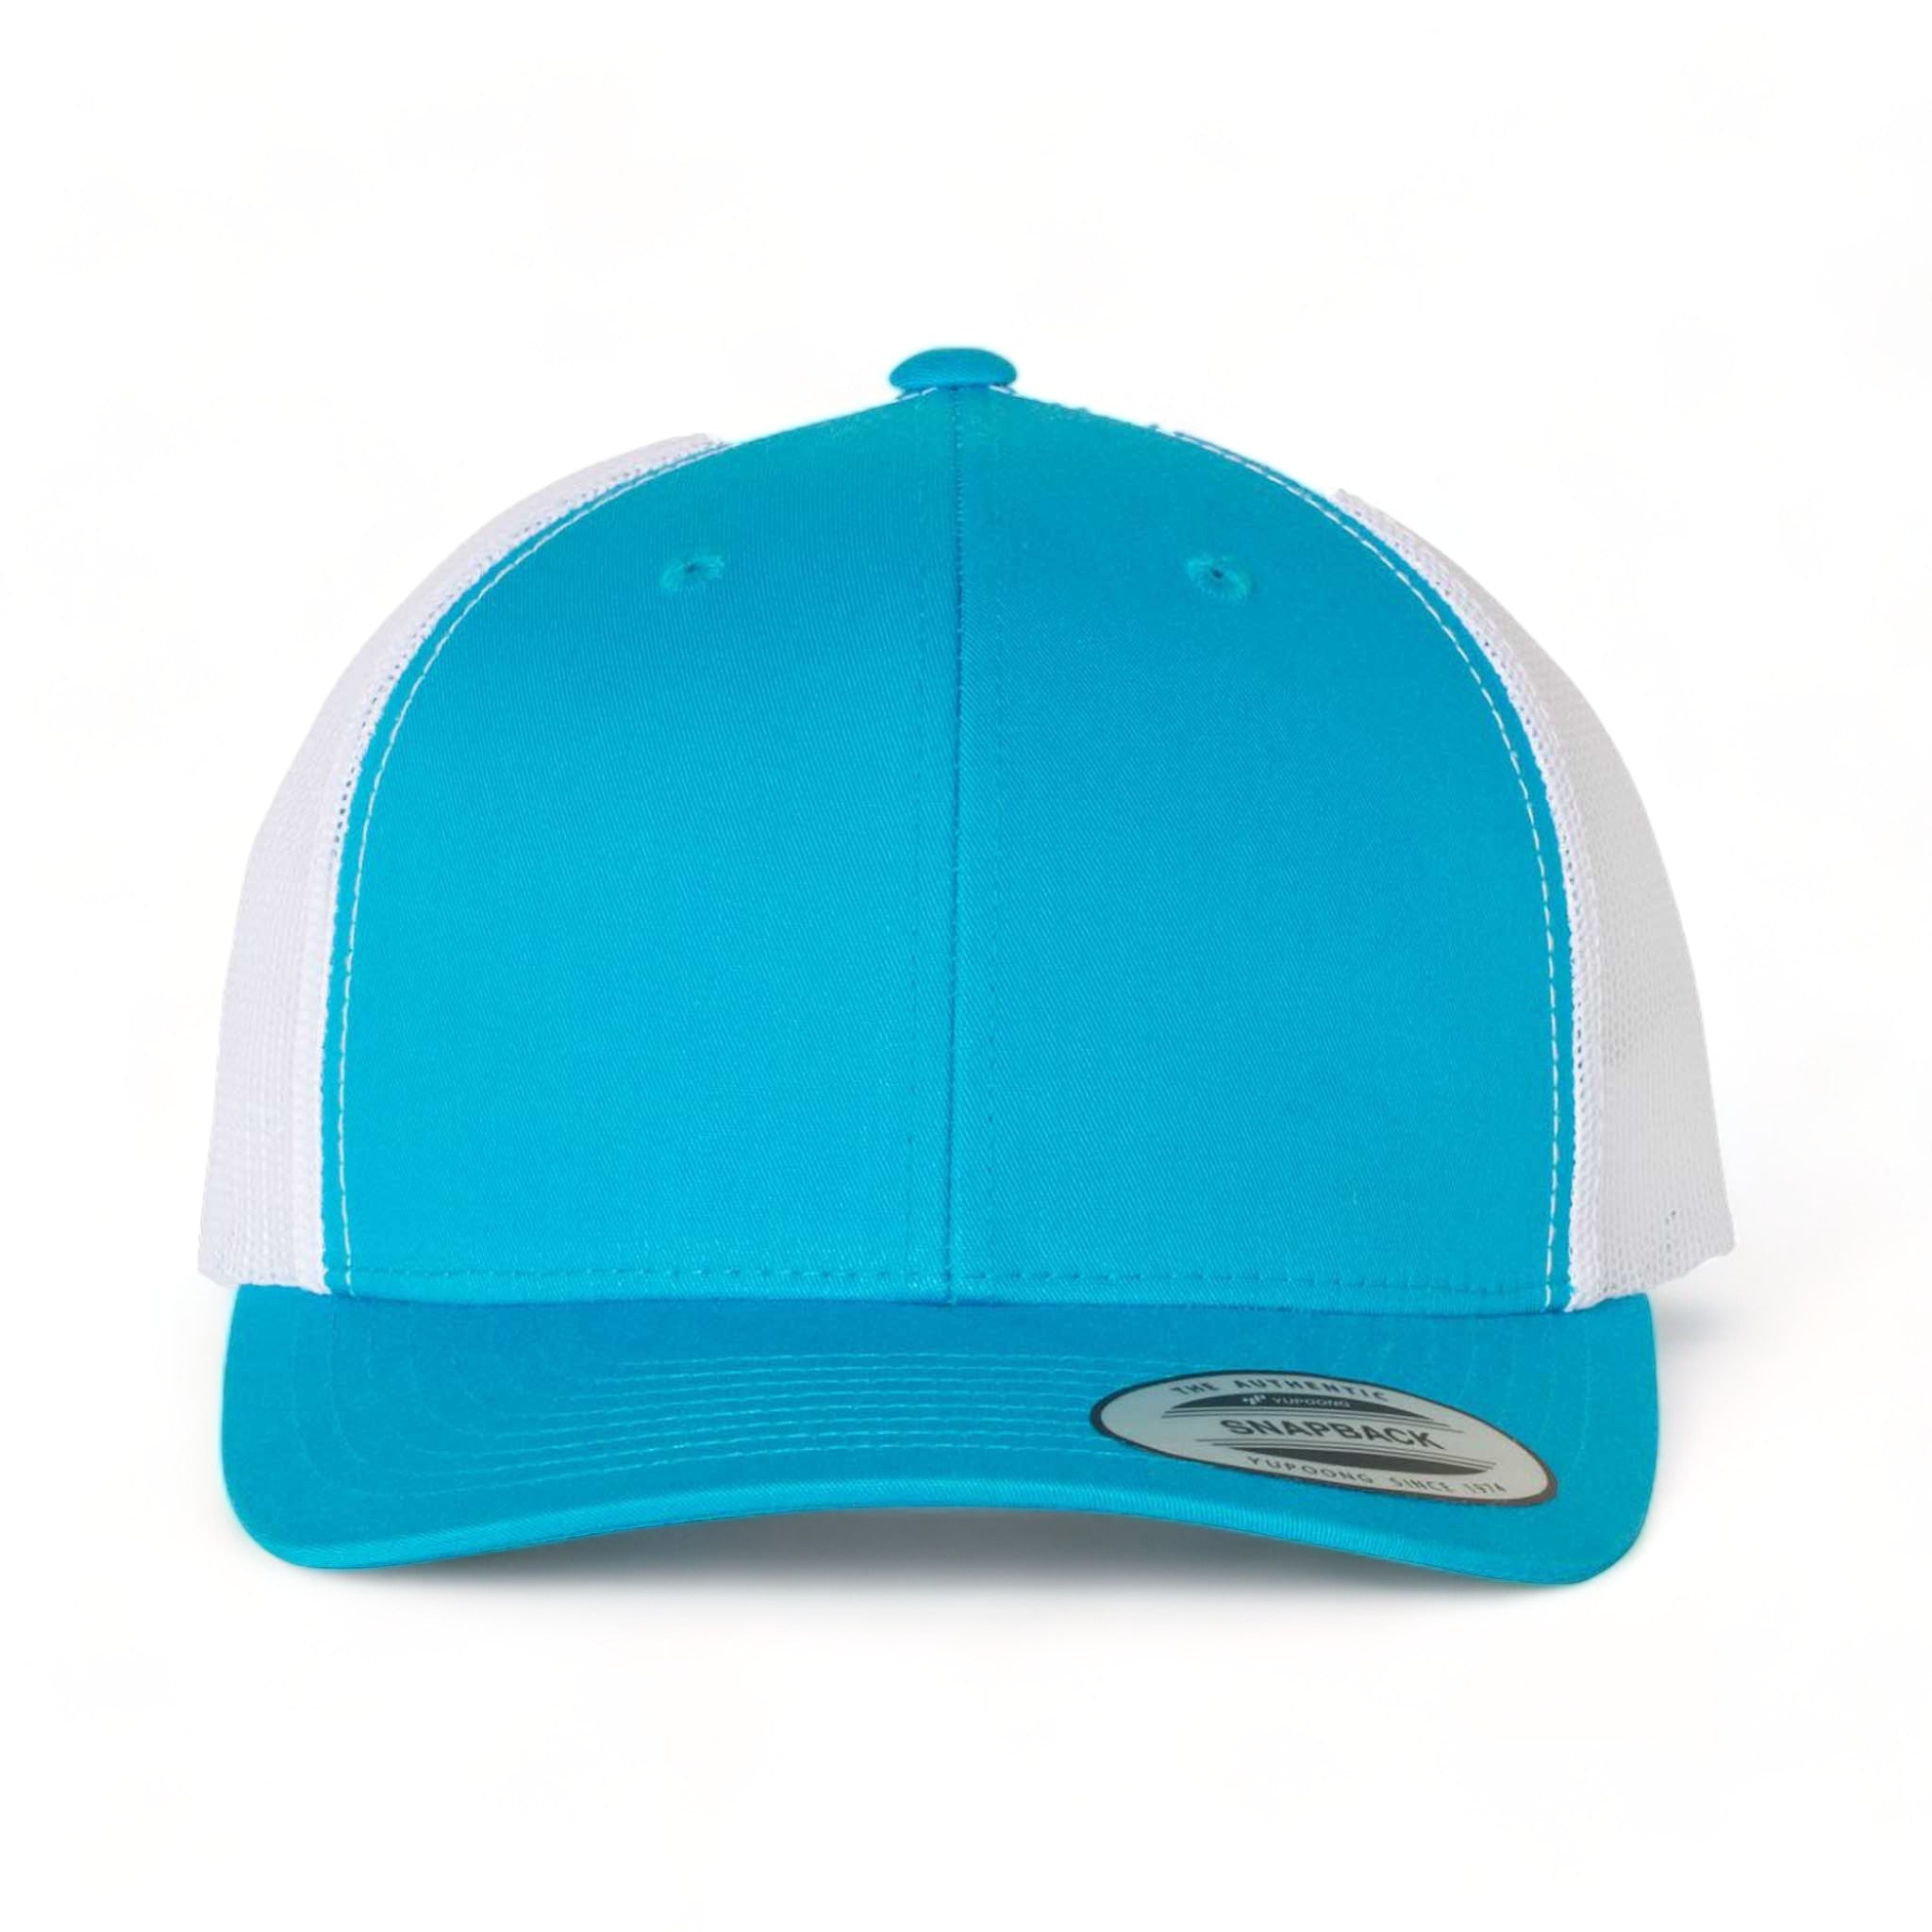 Front view of YP Classics 6606 custom hat in turquoise and white